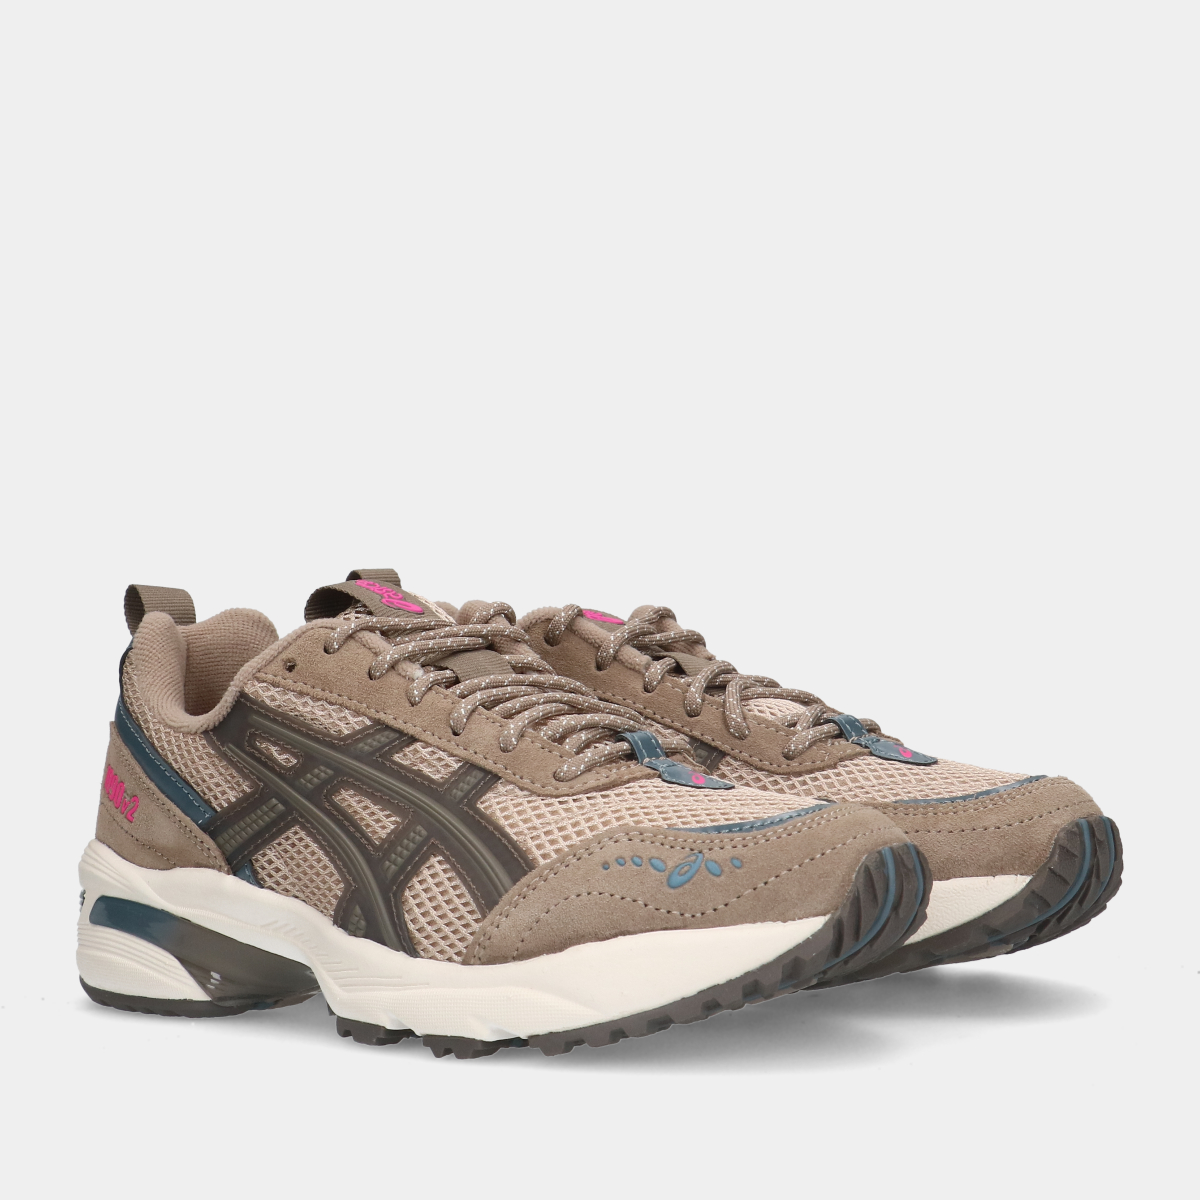 Asics GEL-1090 V2 Simply Taupe/Dark Taupe dames sneakers